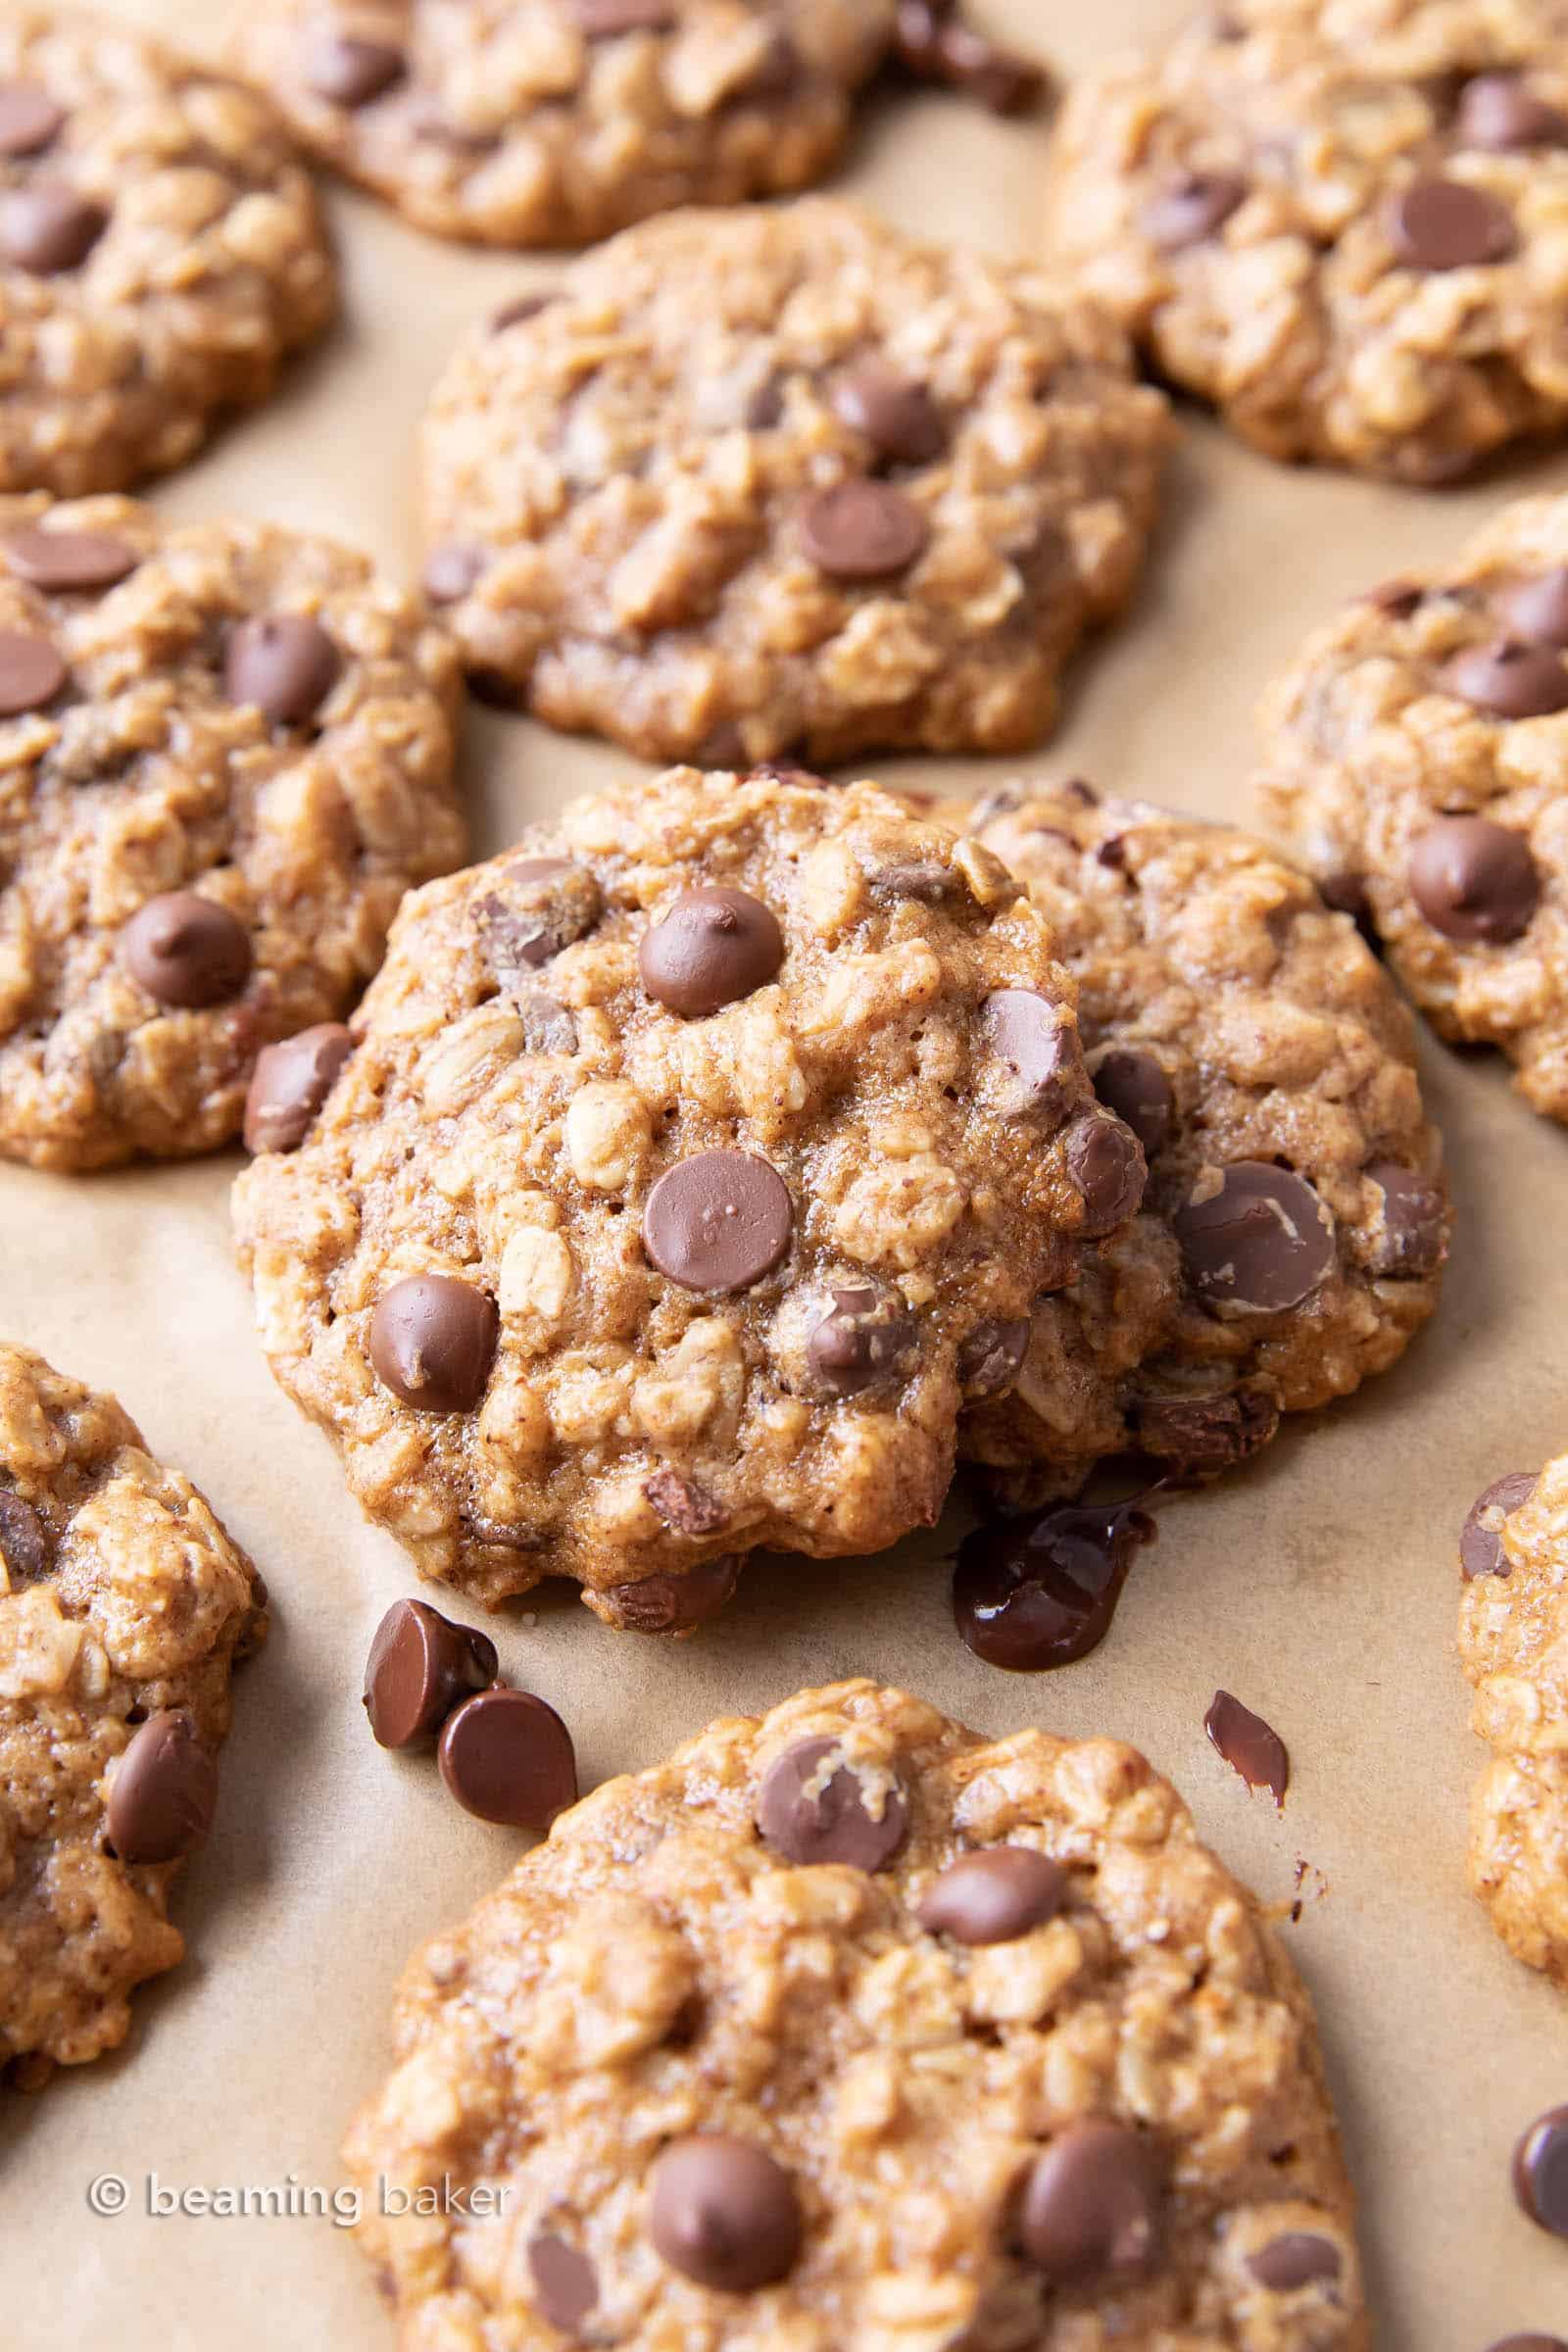 Easy Healthy Oatmeal Chocolate Chip Cookies: this easy healthy oatmeal chocolate chip cookies recipe yields chewy cookies with crispy edges and lots of chocolate chips! Vegan, Gluten-Free, Dairy-Free, Healthy. #Healthy #OatmealCookies #HealthyCookies #ChocolateChip | Recipe at BeamingBaker.com